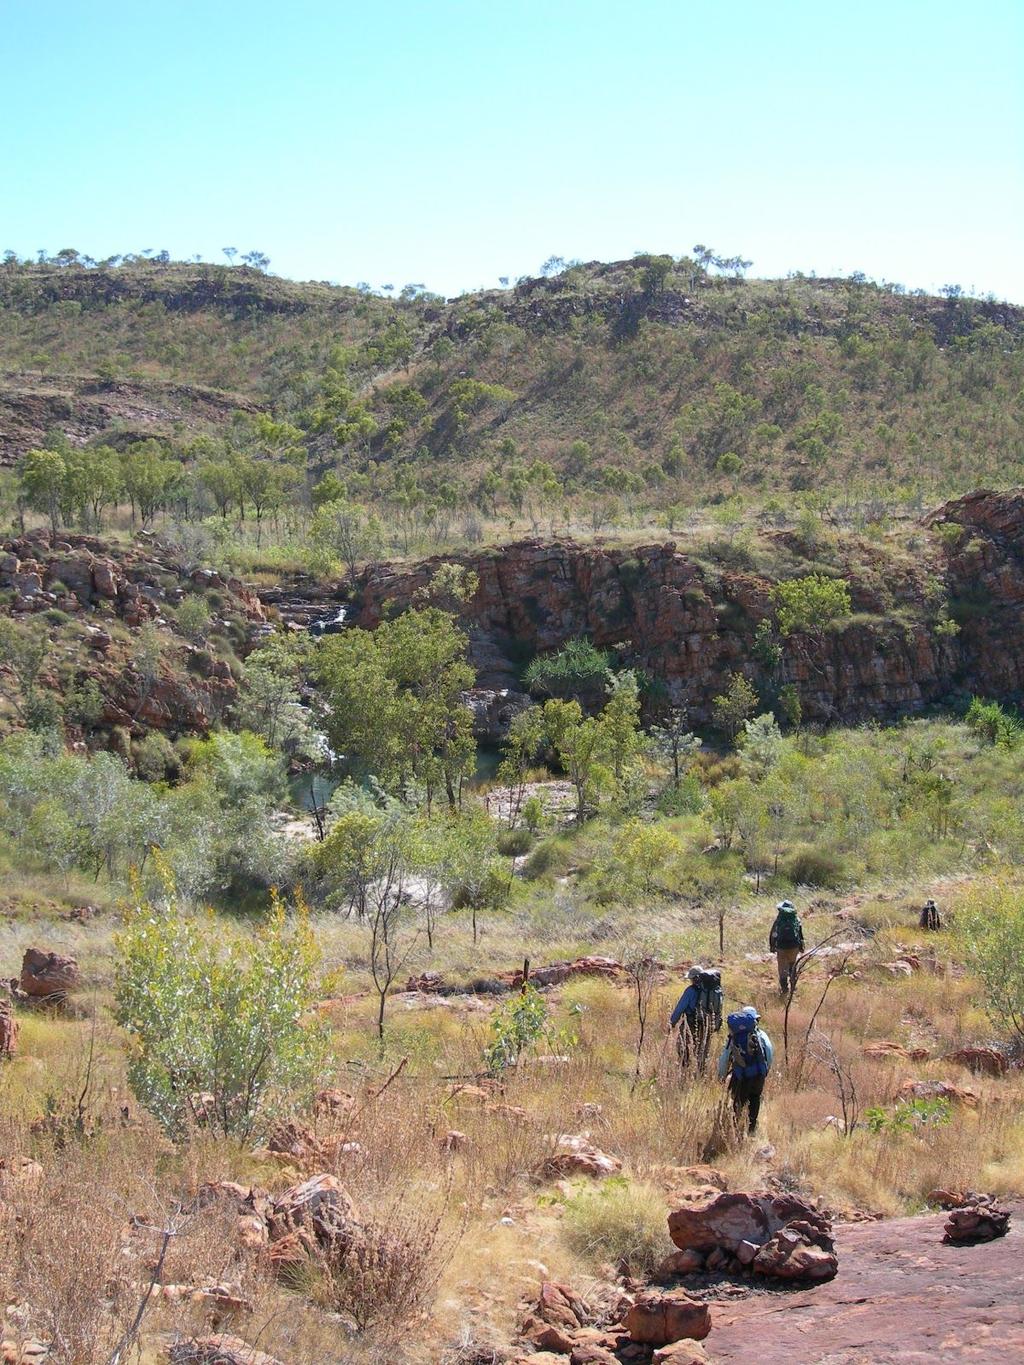 Nonviolent Communication An untracked Kimberley Bushwalking Adventure Ancient landscapes and Connection August 11 th -20 th, 2019 A remote, untracked adventure into pristine and